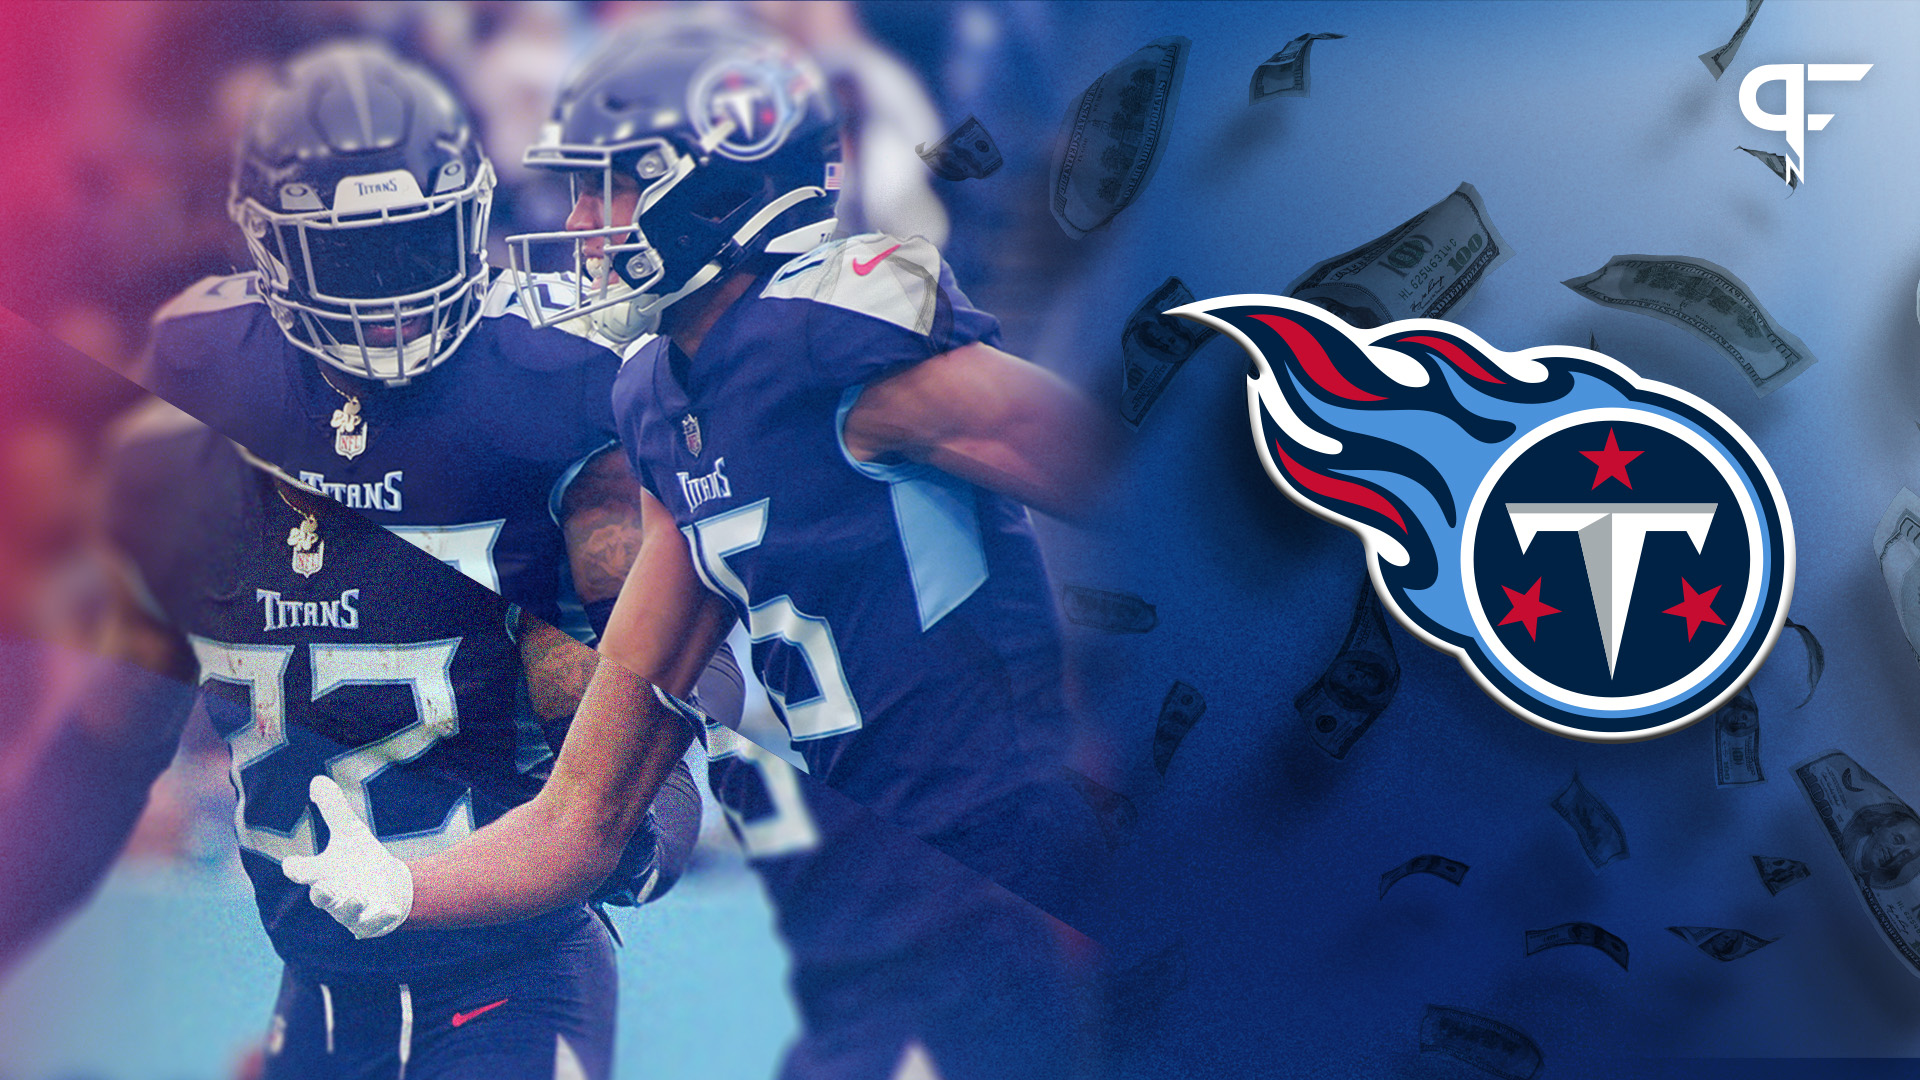 tennessee titans betting